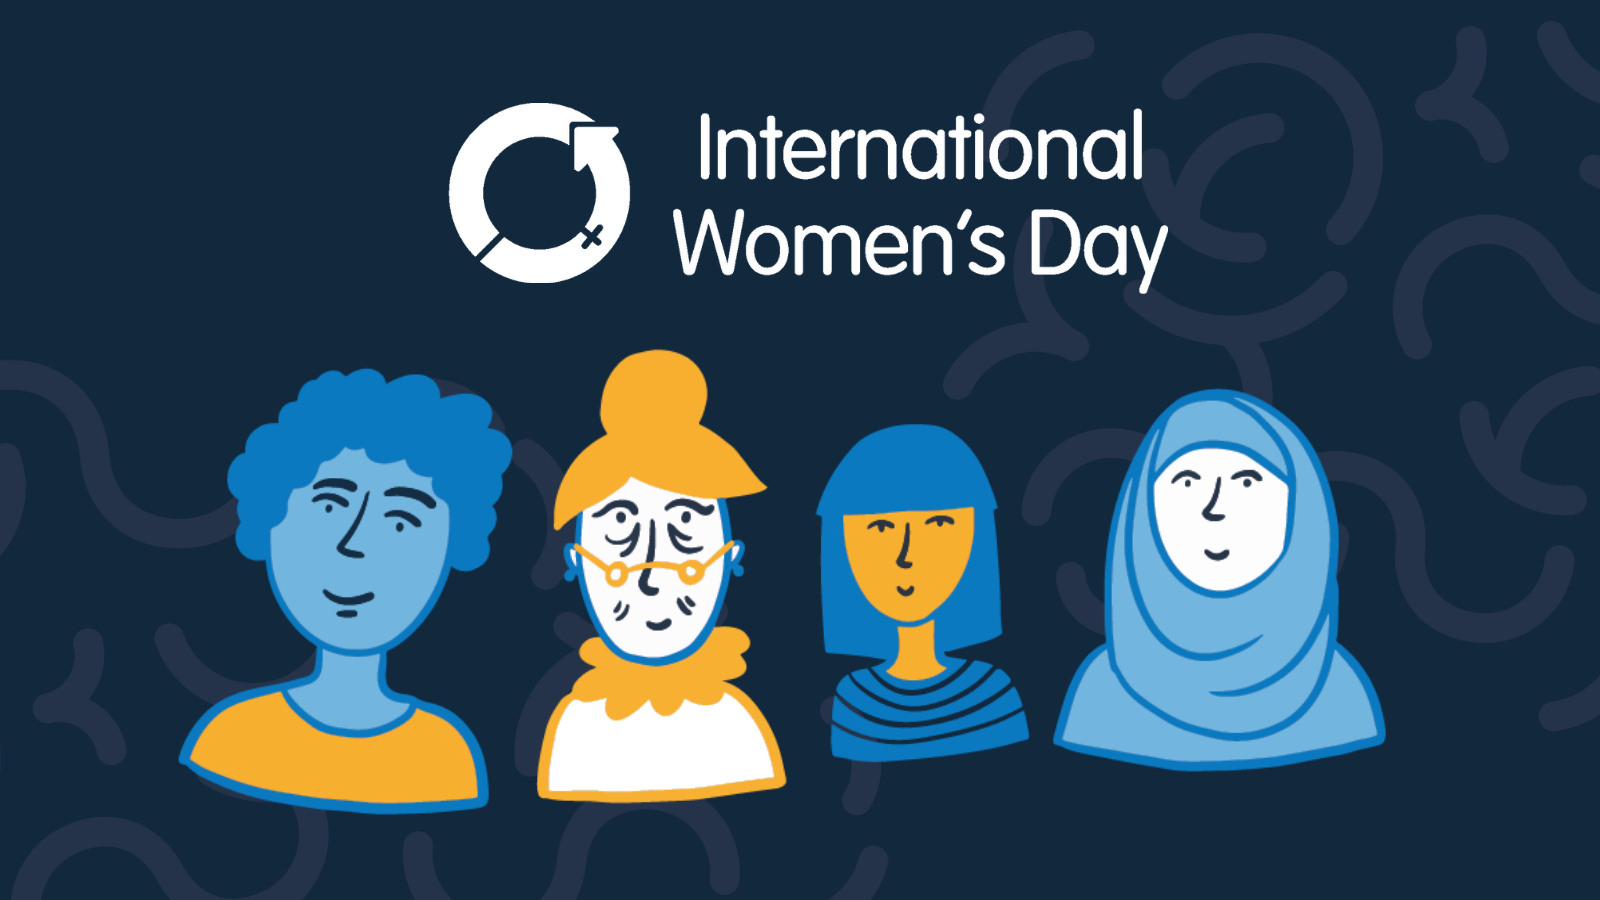 An illustration of women, with the International Women's Day logo above them